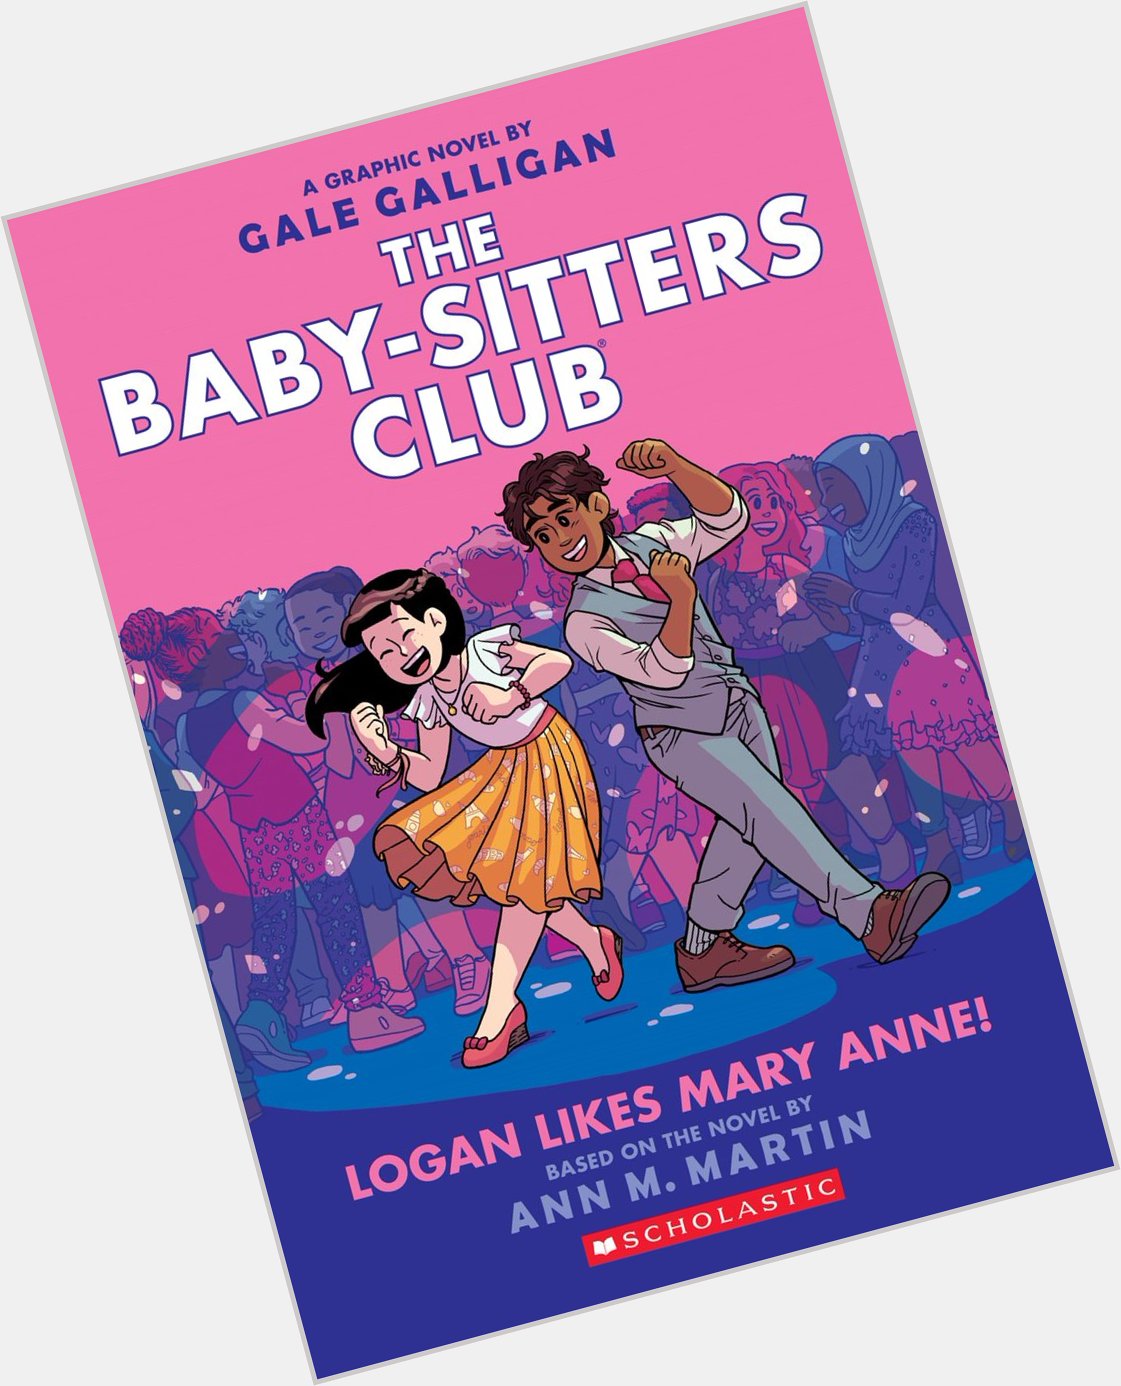 Happy book birthday to and Ann M. Martin\s Logan Likes Mary Anne! (The Baby-Sitters Club Graphic Novel 